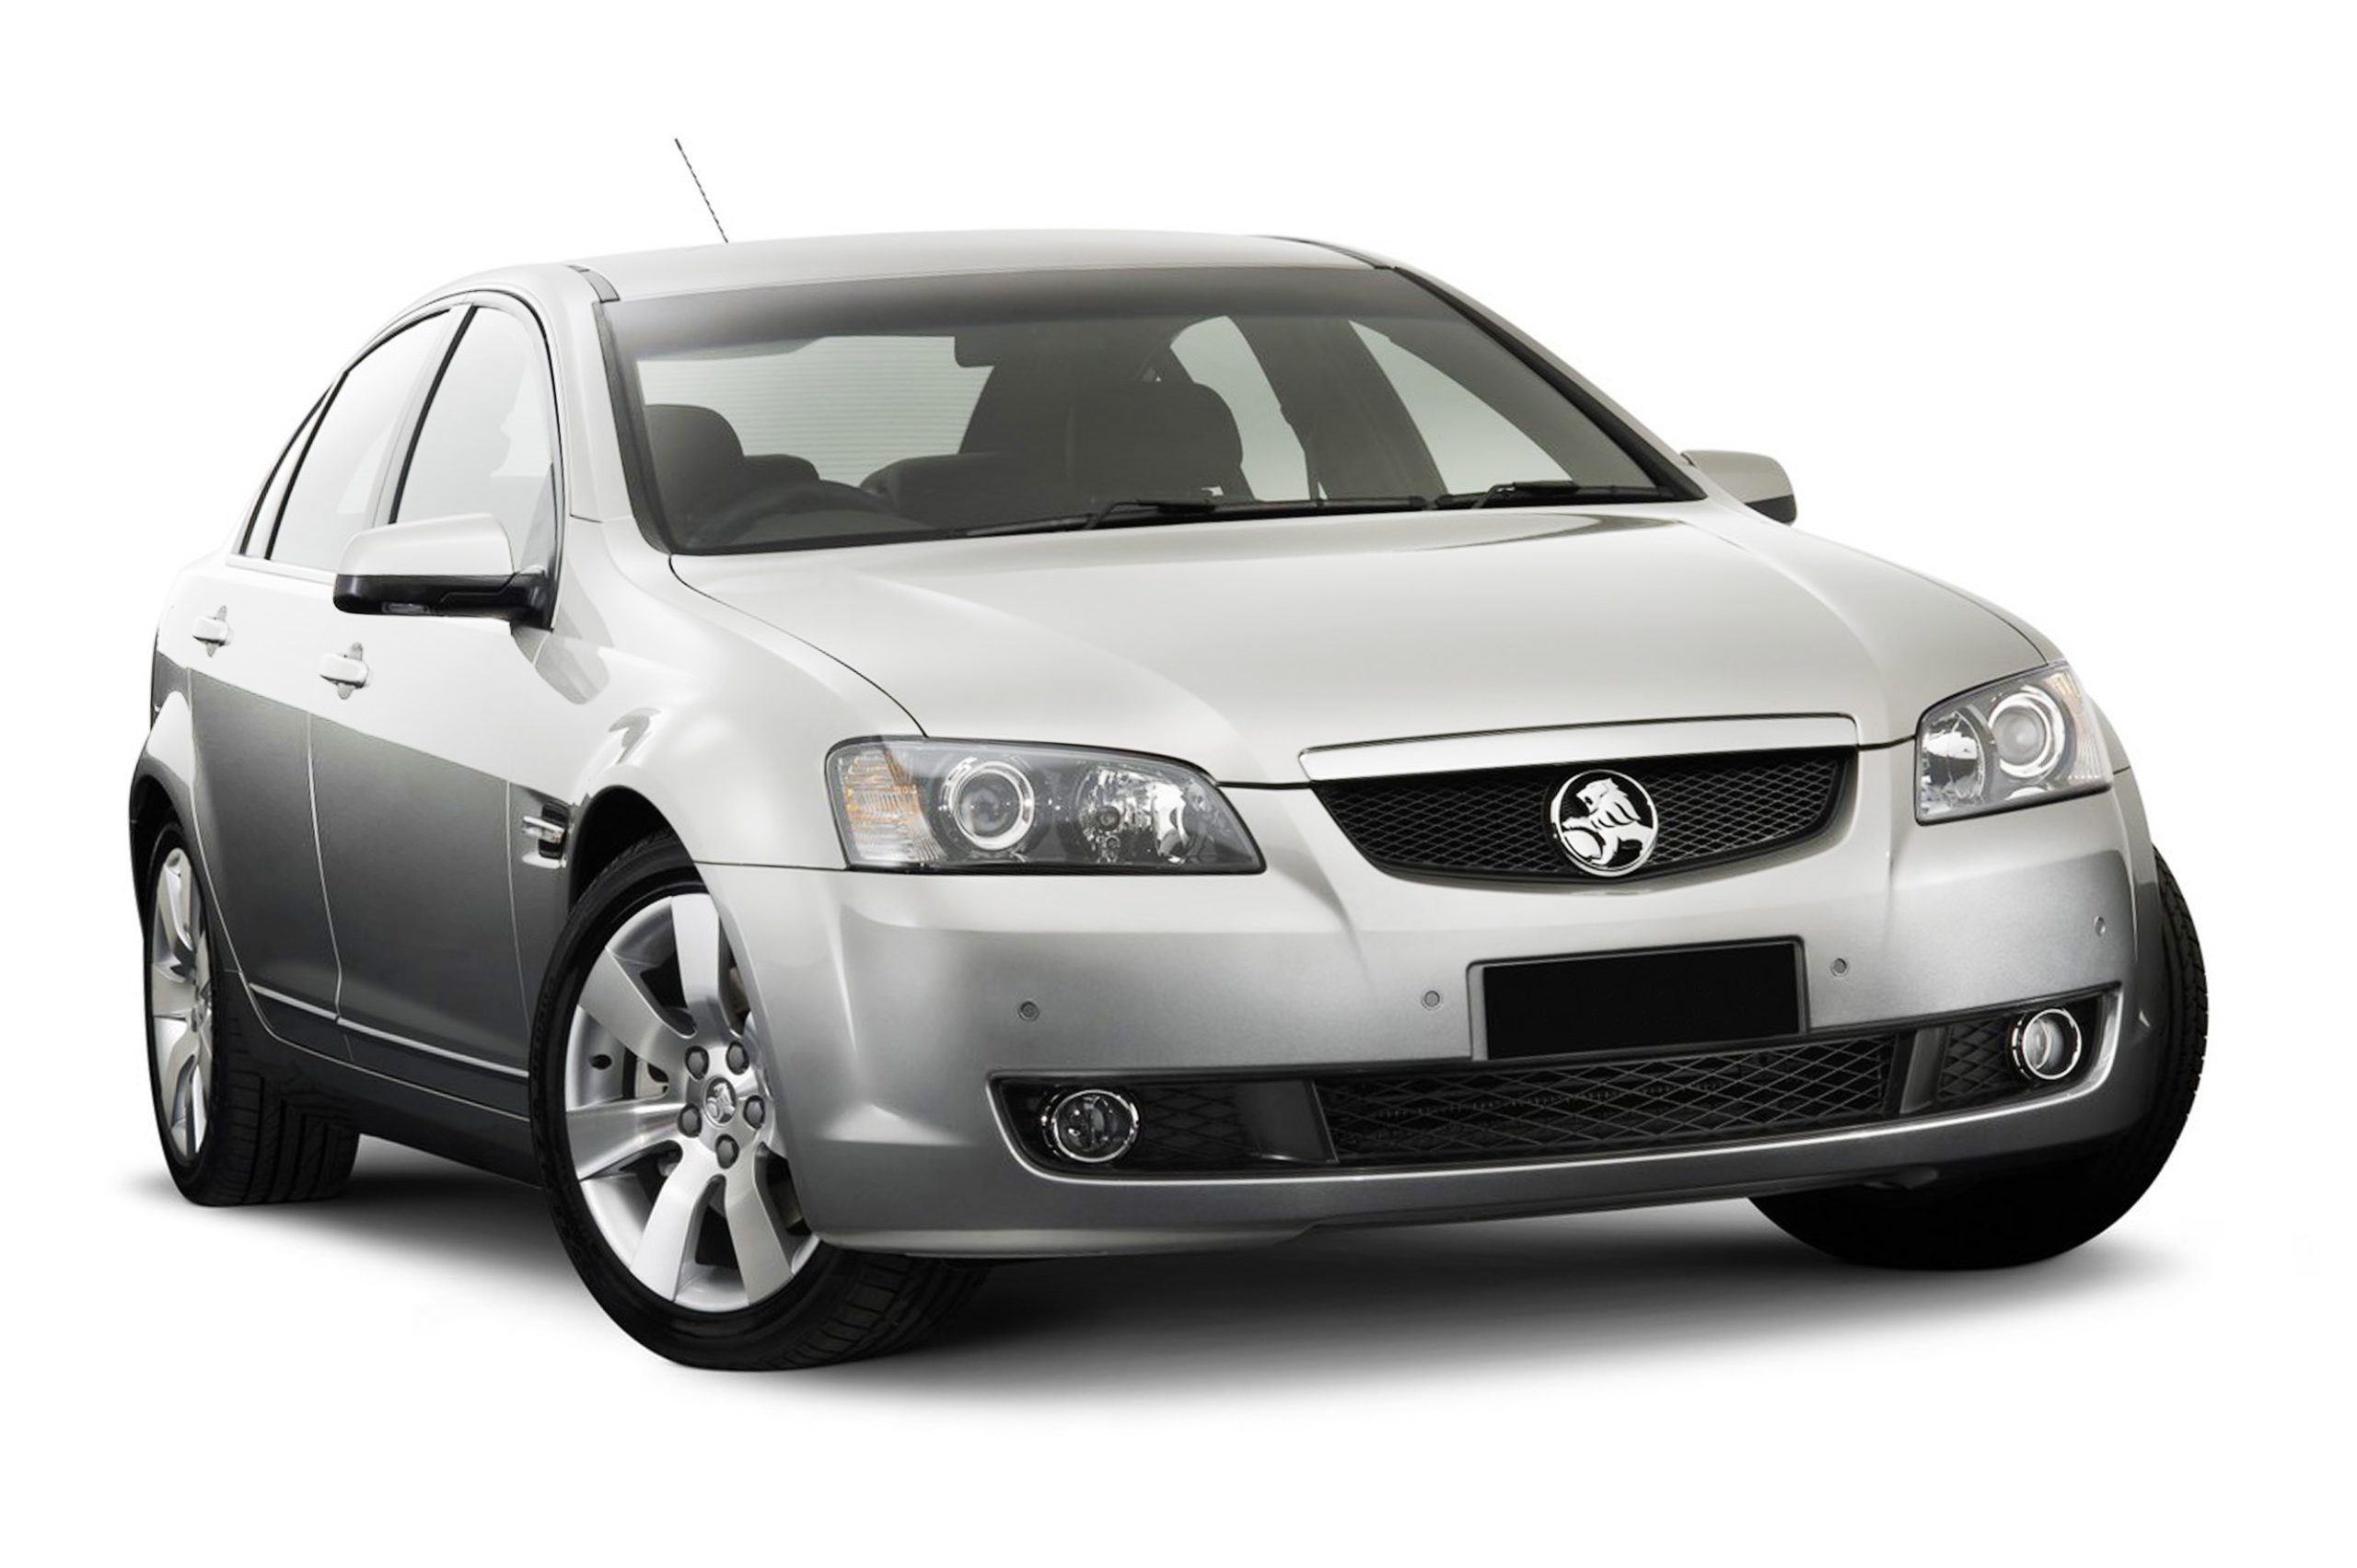 Illawarra sedan service, transportation to and from airport or cruise.